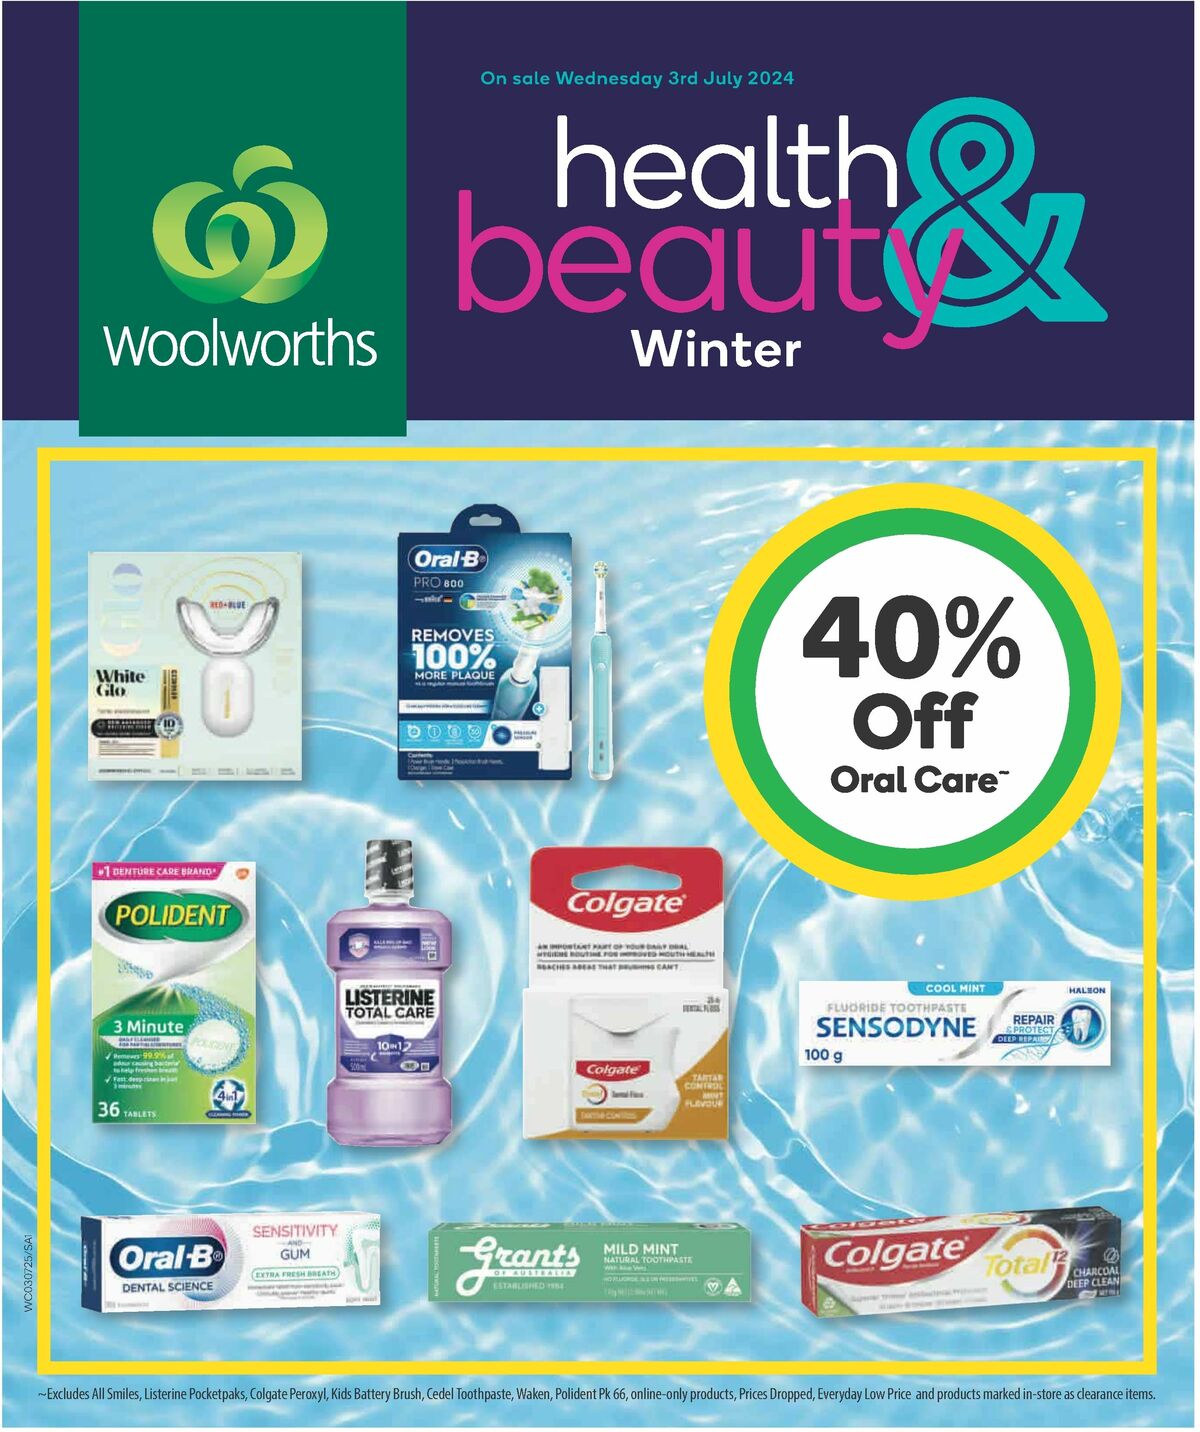 Woolworths Winter Health & Beauty Catalogues from 3 July